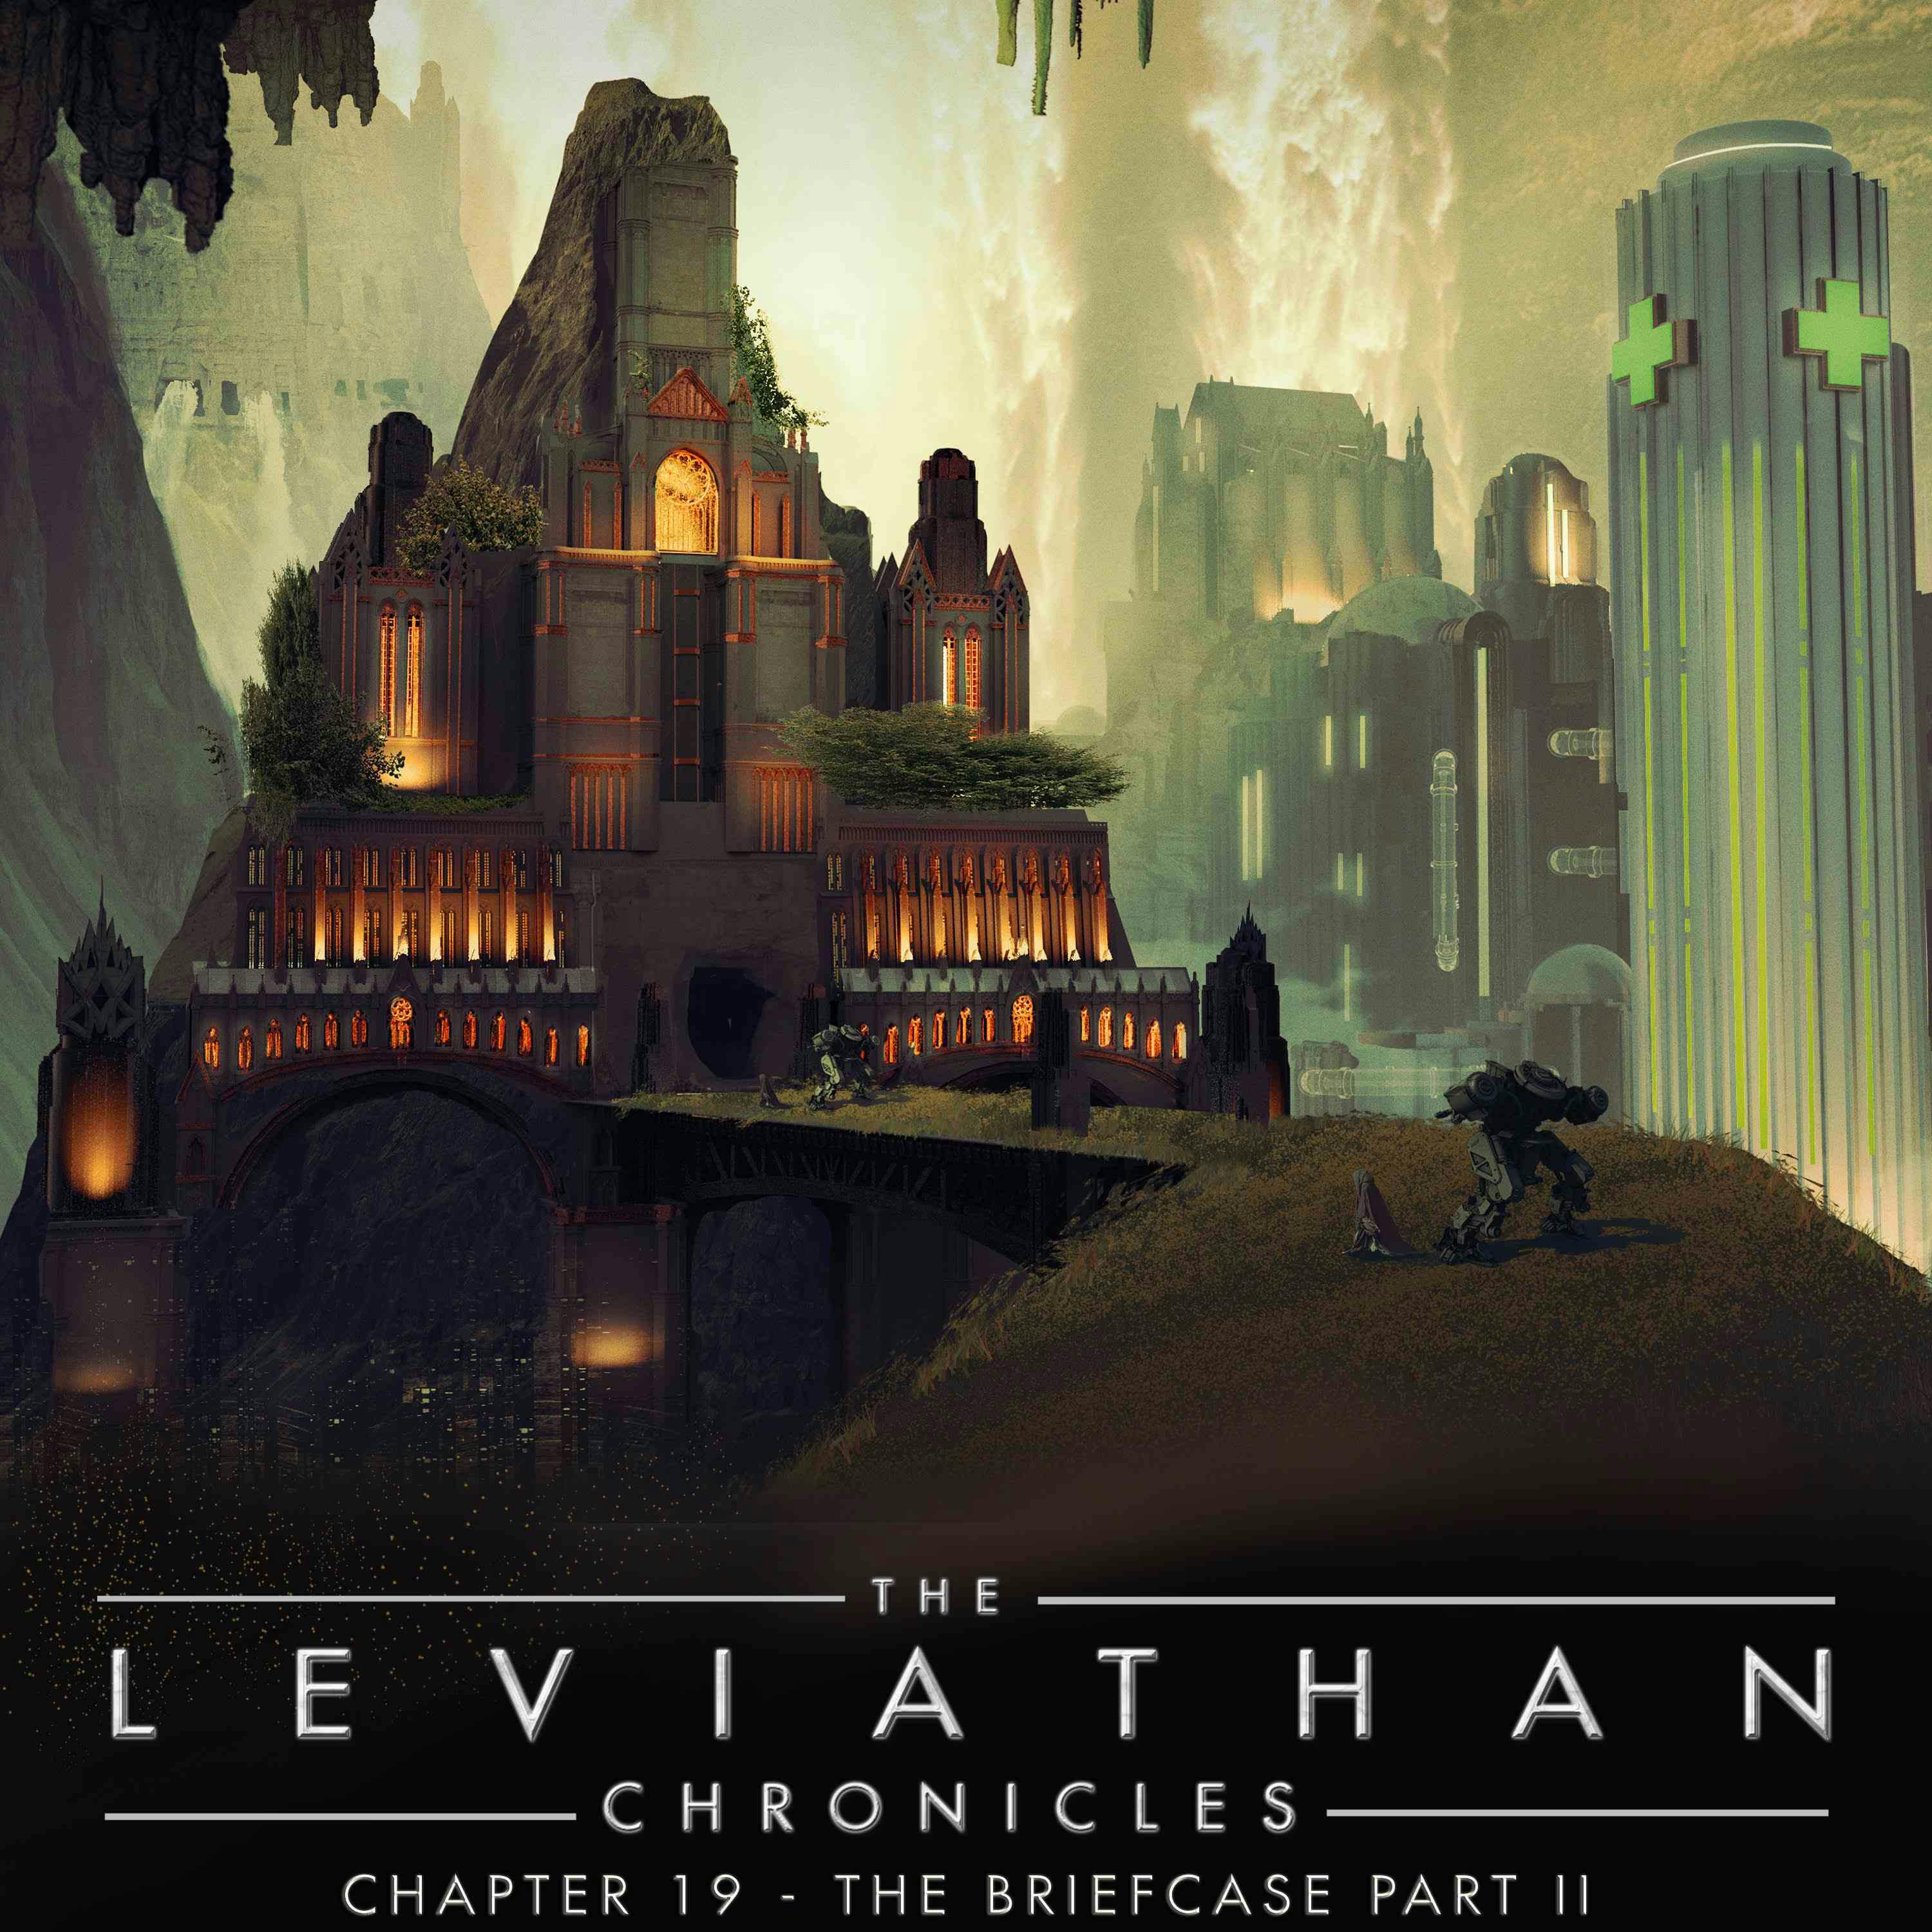 The Leviathan Chronicles | Chapter 19 - The Briefcase Part II